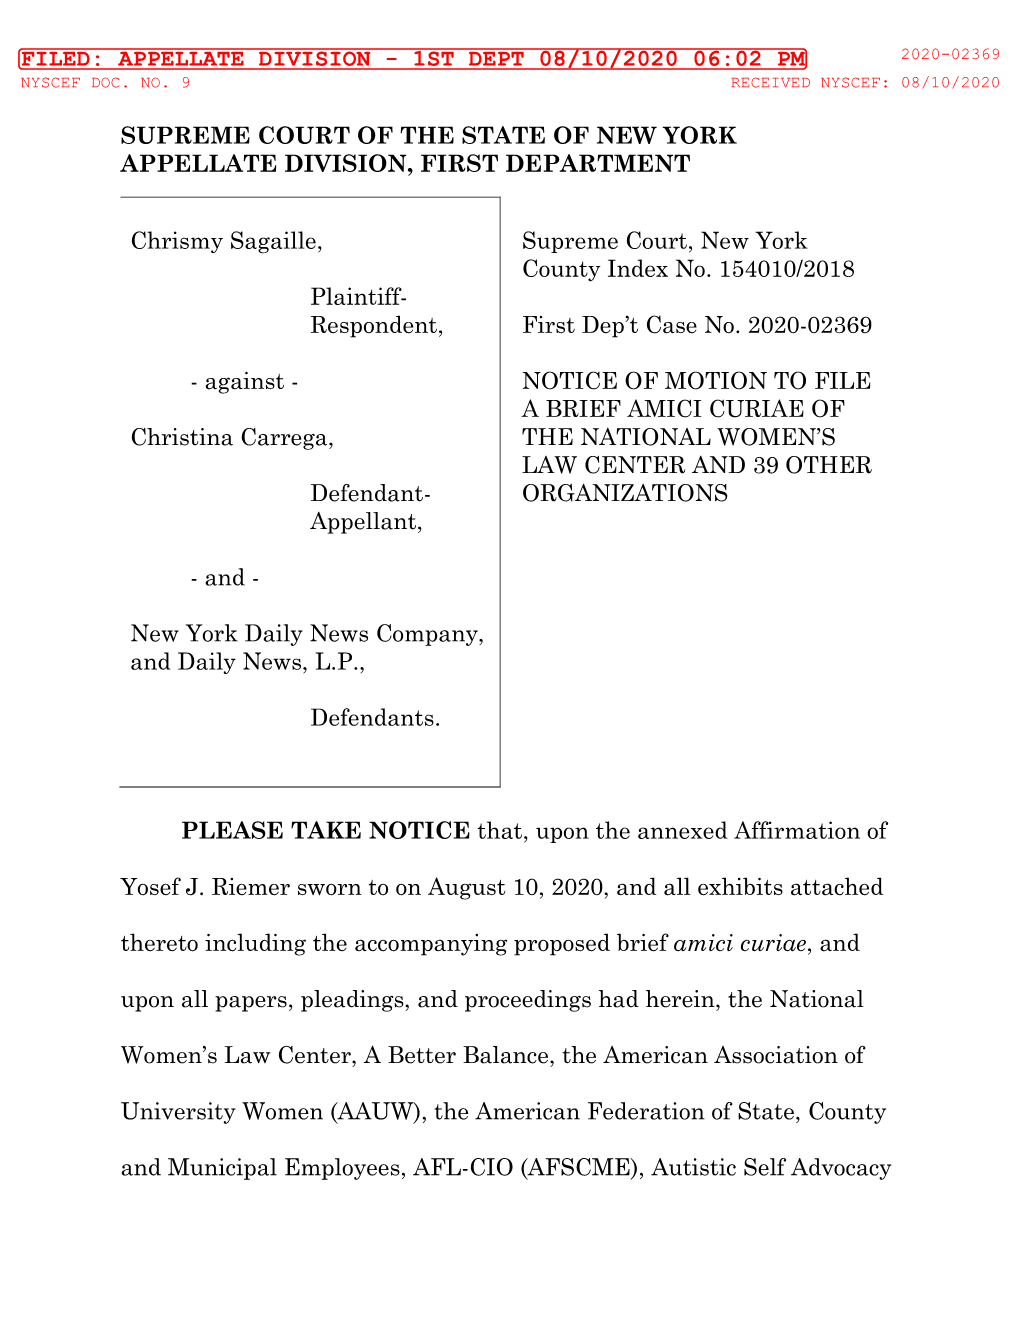 Supreme Court of the State of New York Appellate Division, First Department